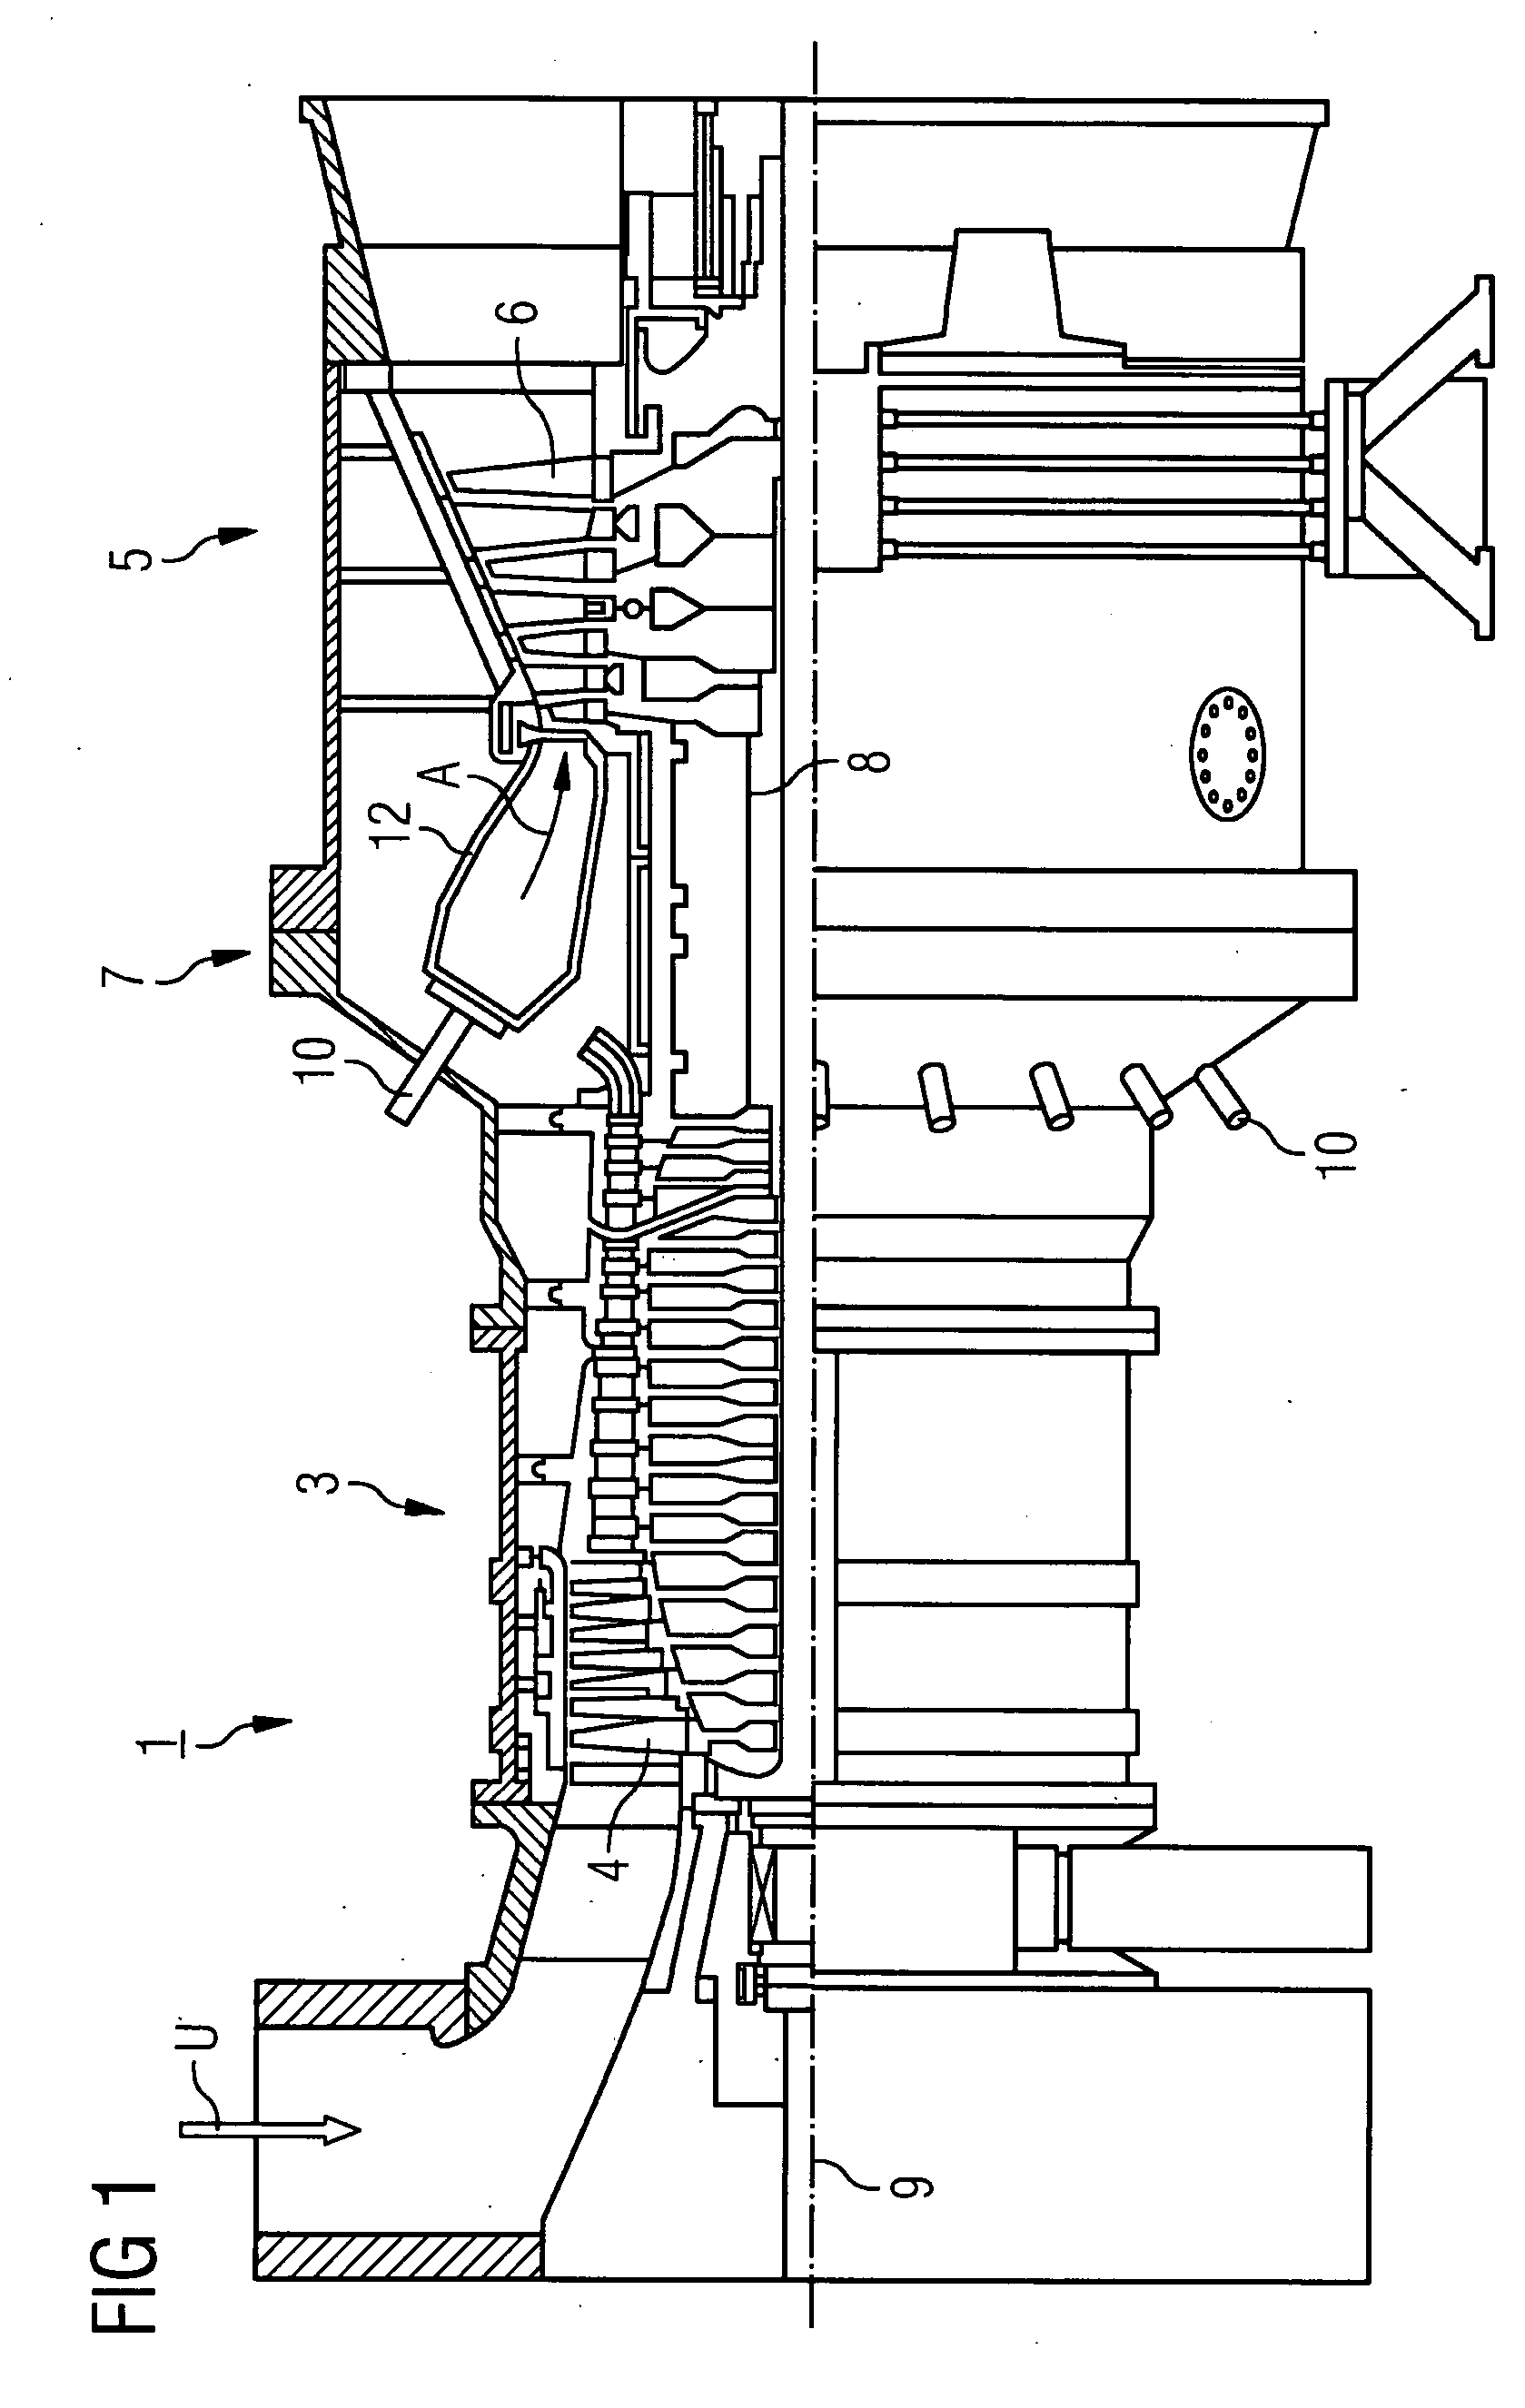 Method and Device for Regulating the Operating Line of a Gas Turbine Combustion Chamber